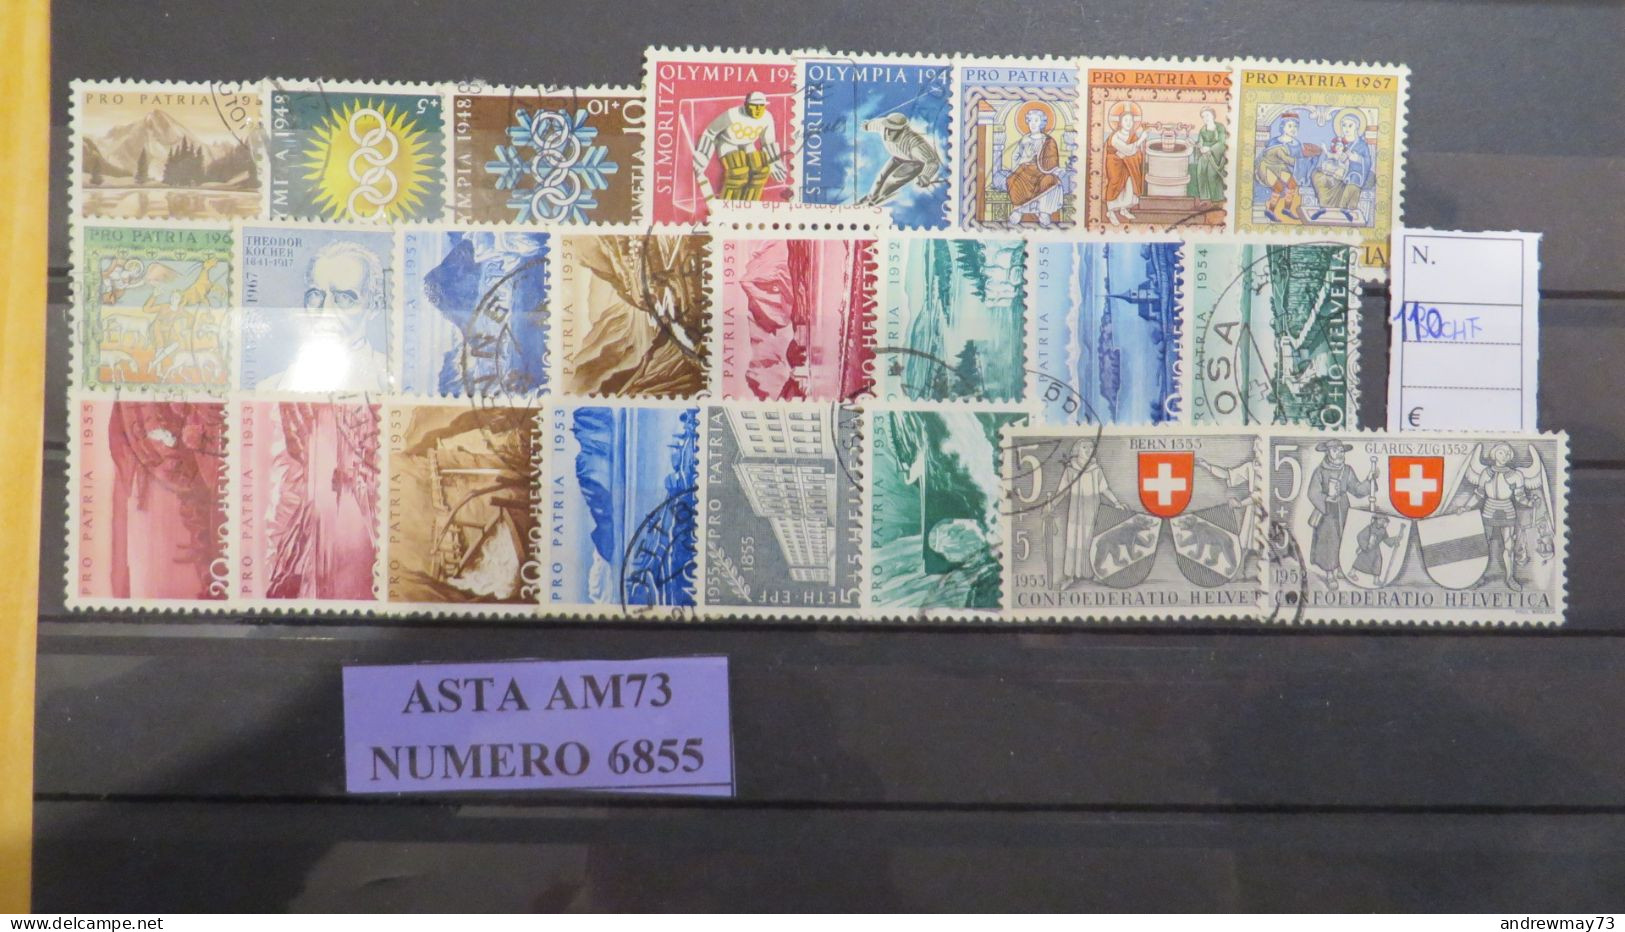 SWITZERLAND- NICE USED SELECTION- BARGAIN PRICE - Lotes/Colecciones